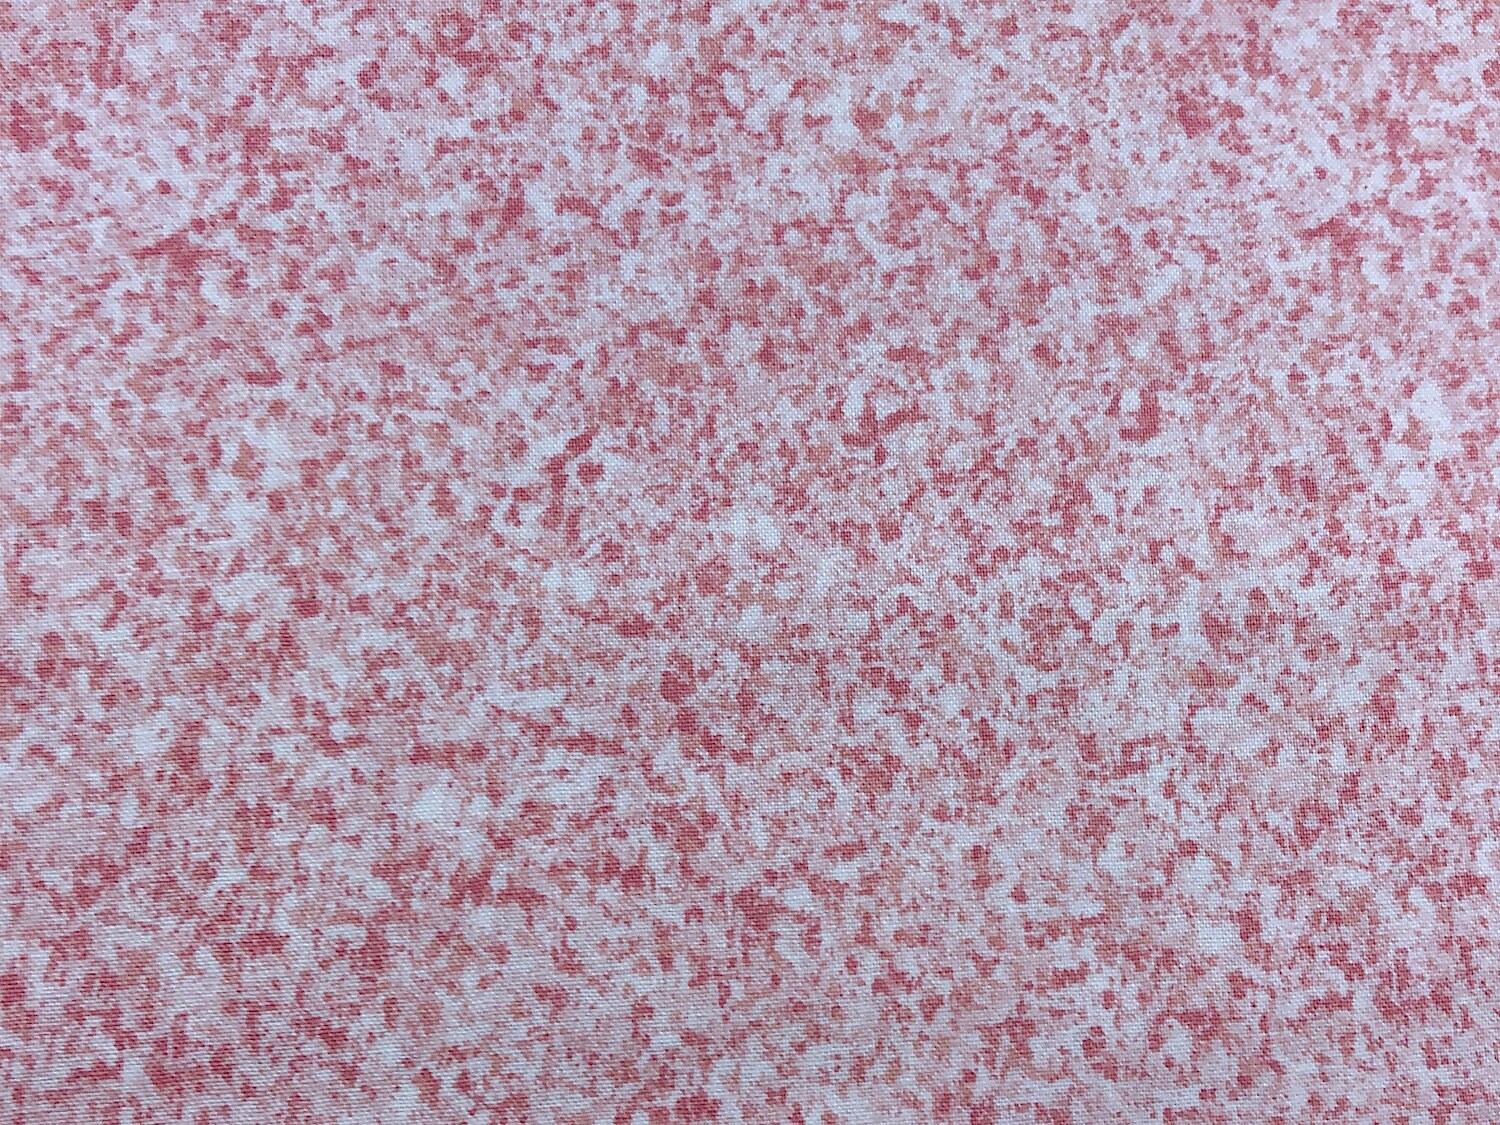 This is a blender fabric which is covered with shades of pink.